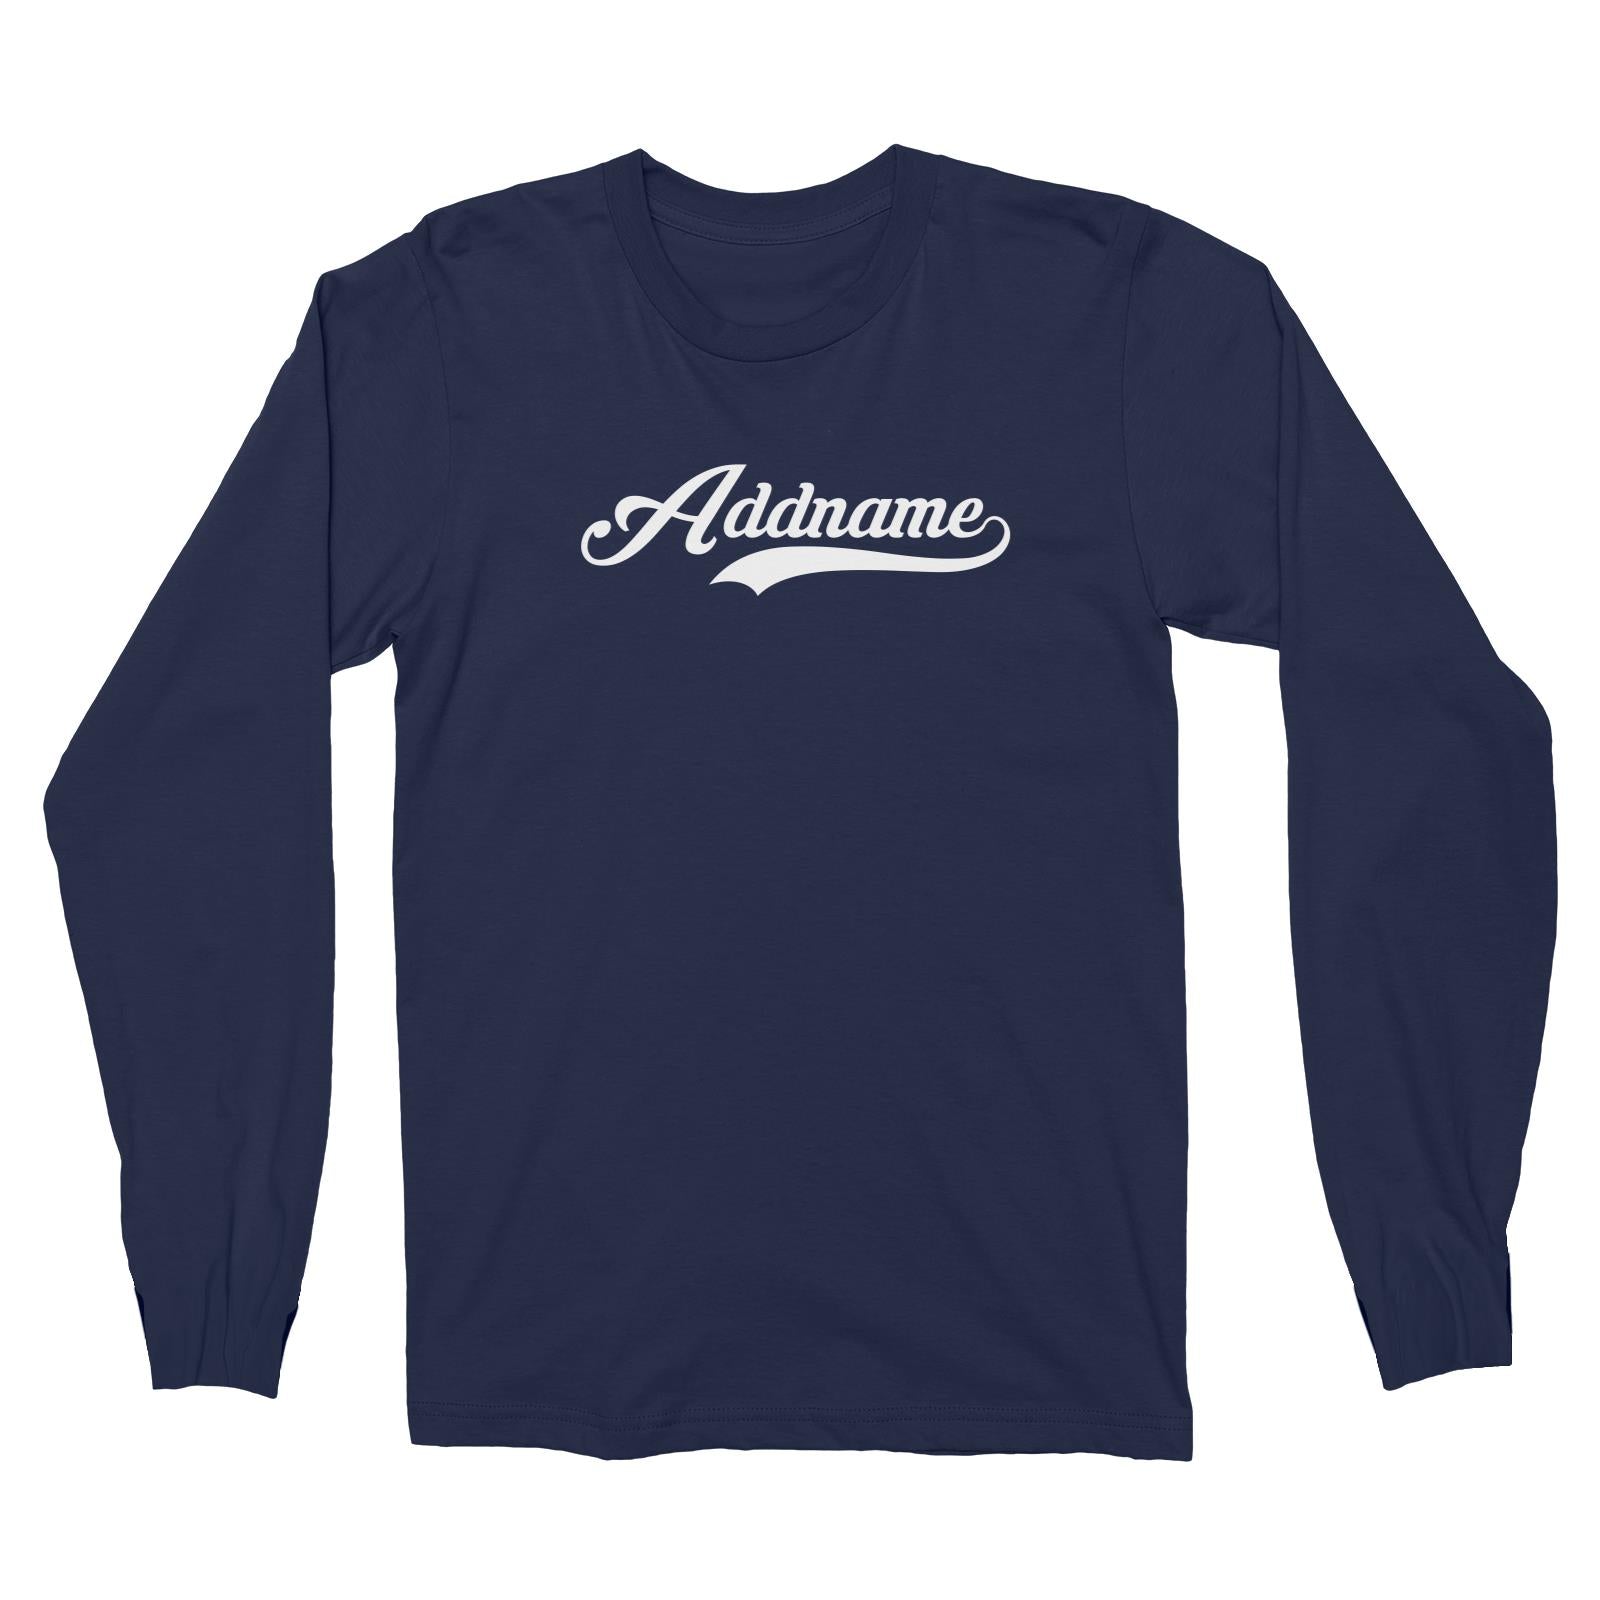 Retro Addname Long Sleeve Unisex T-Shirt  Matching Family Personalizable Designs